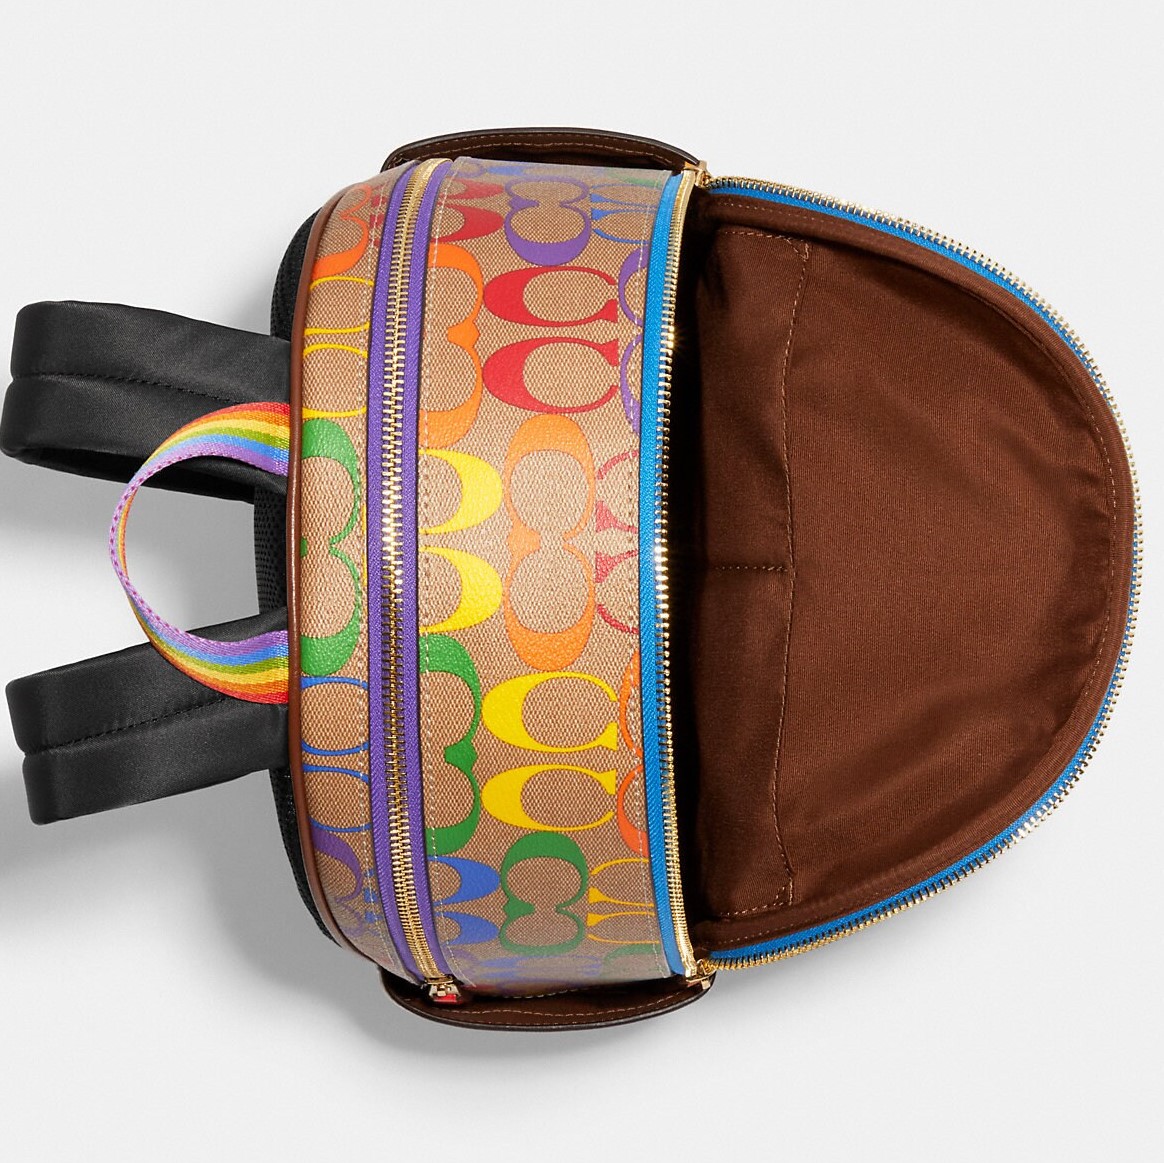 BALO NỮ CẦU VỒNG COACH COURT BACKPACK IN RAINBOW SIGNATURE CANVAS CA140 8